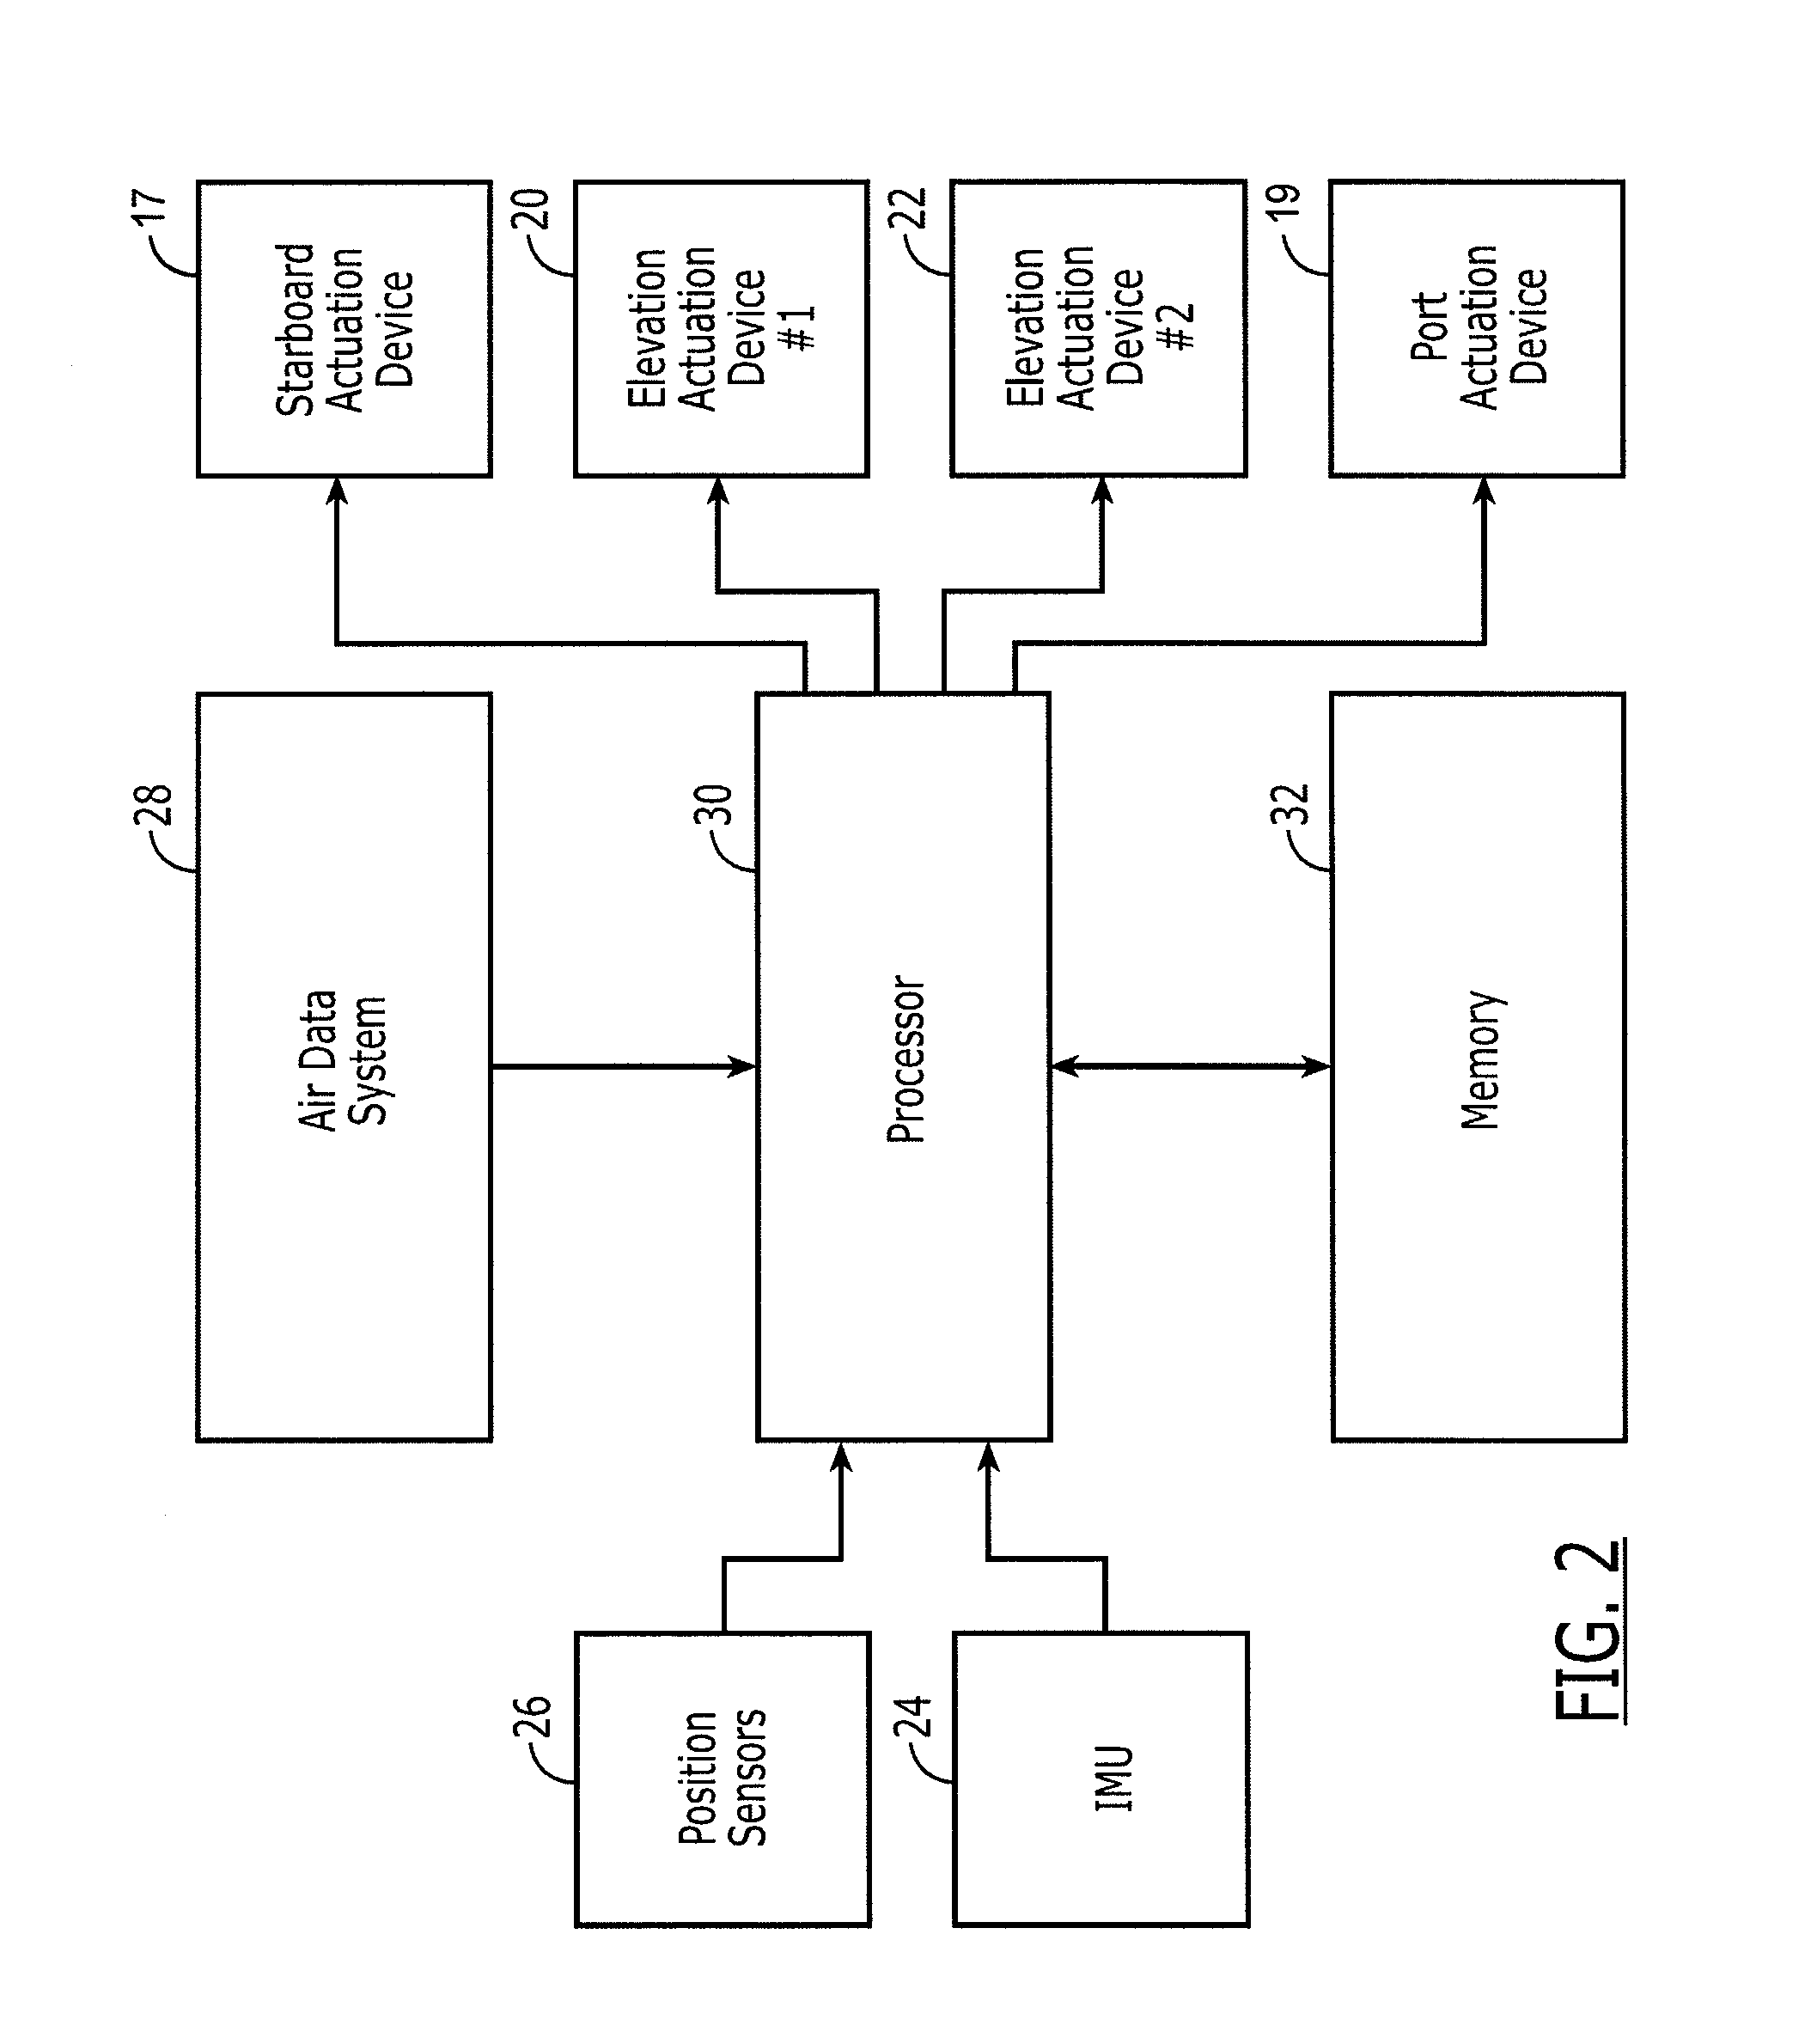 Method and apparatus for controlling a refueling drogue